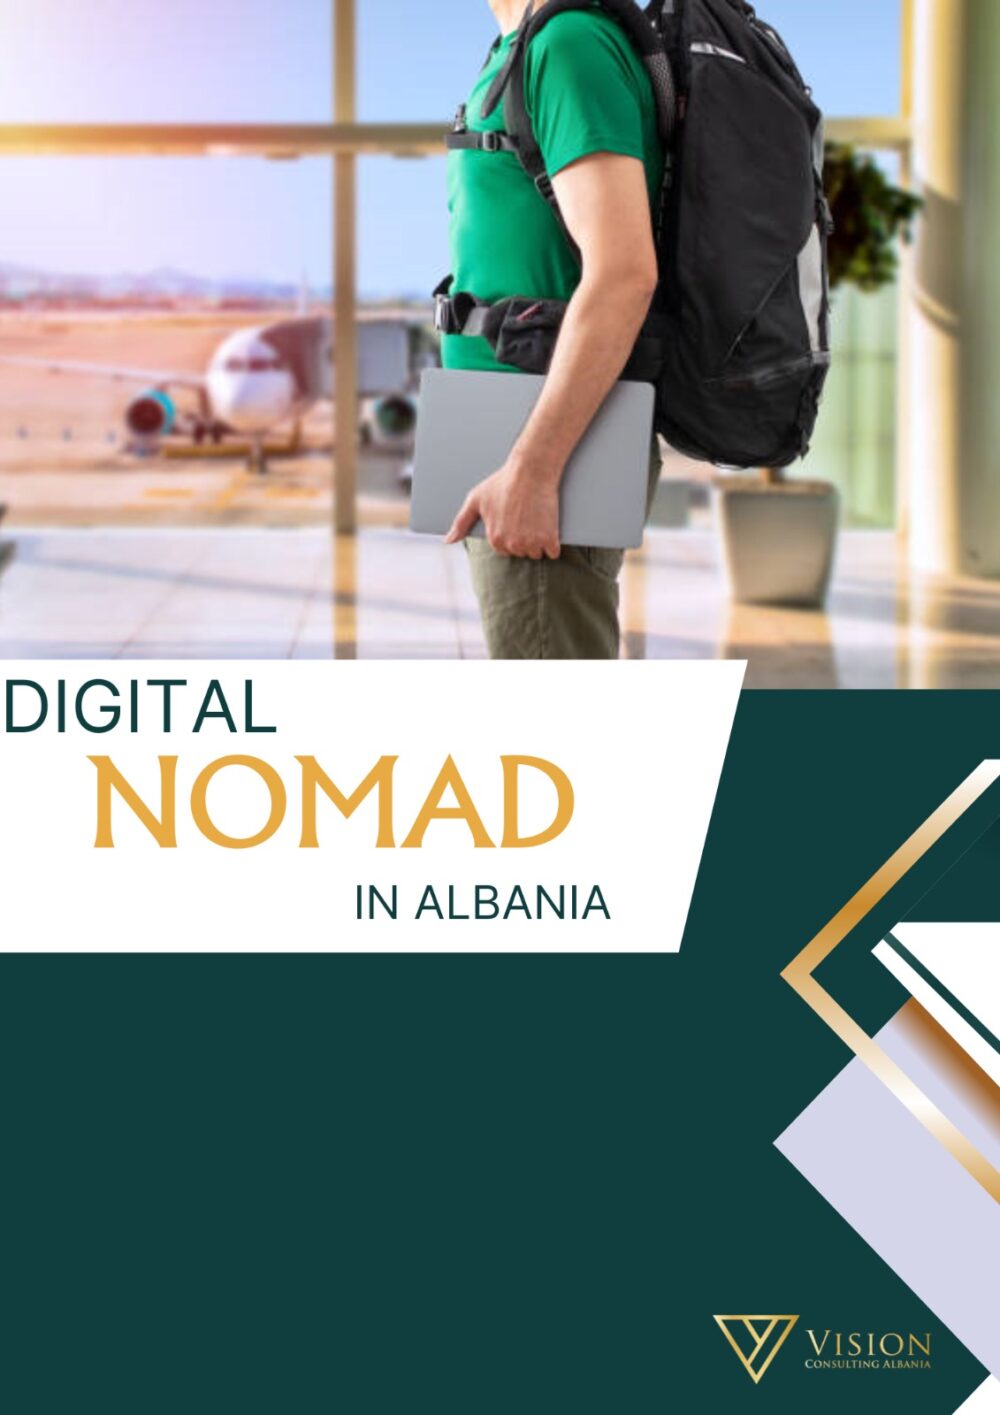 Digital nomad residence by Vision Consulting Albania